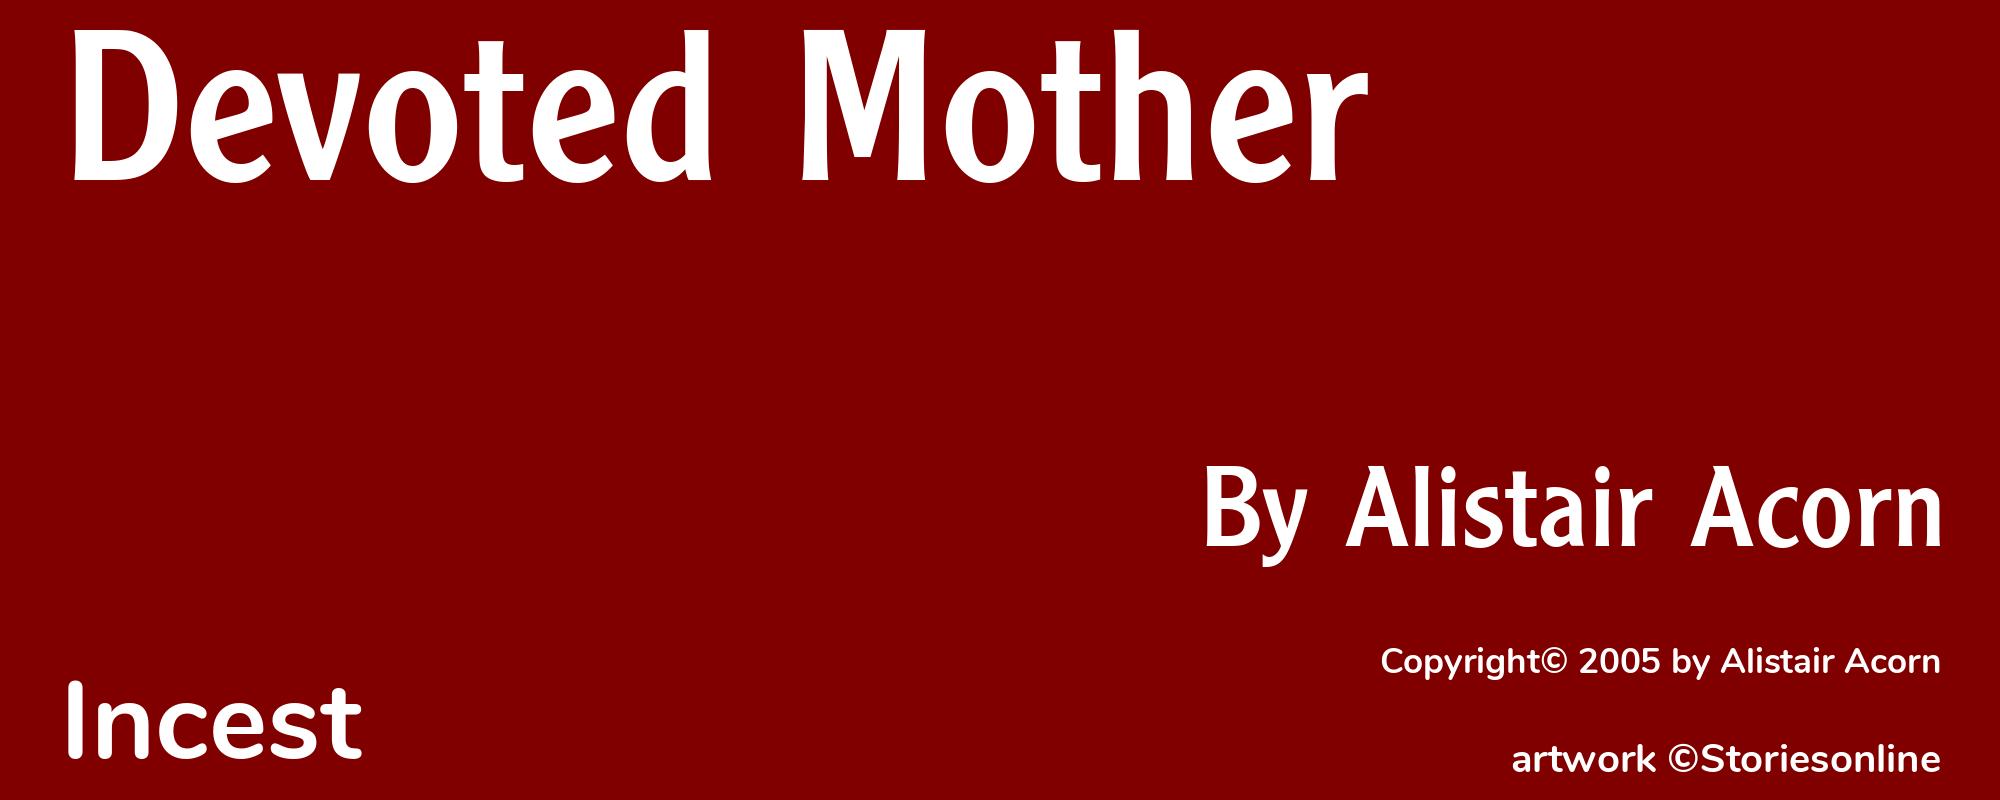 Devoted Mother - Cover